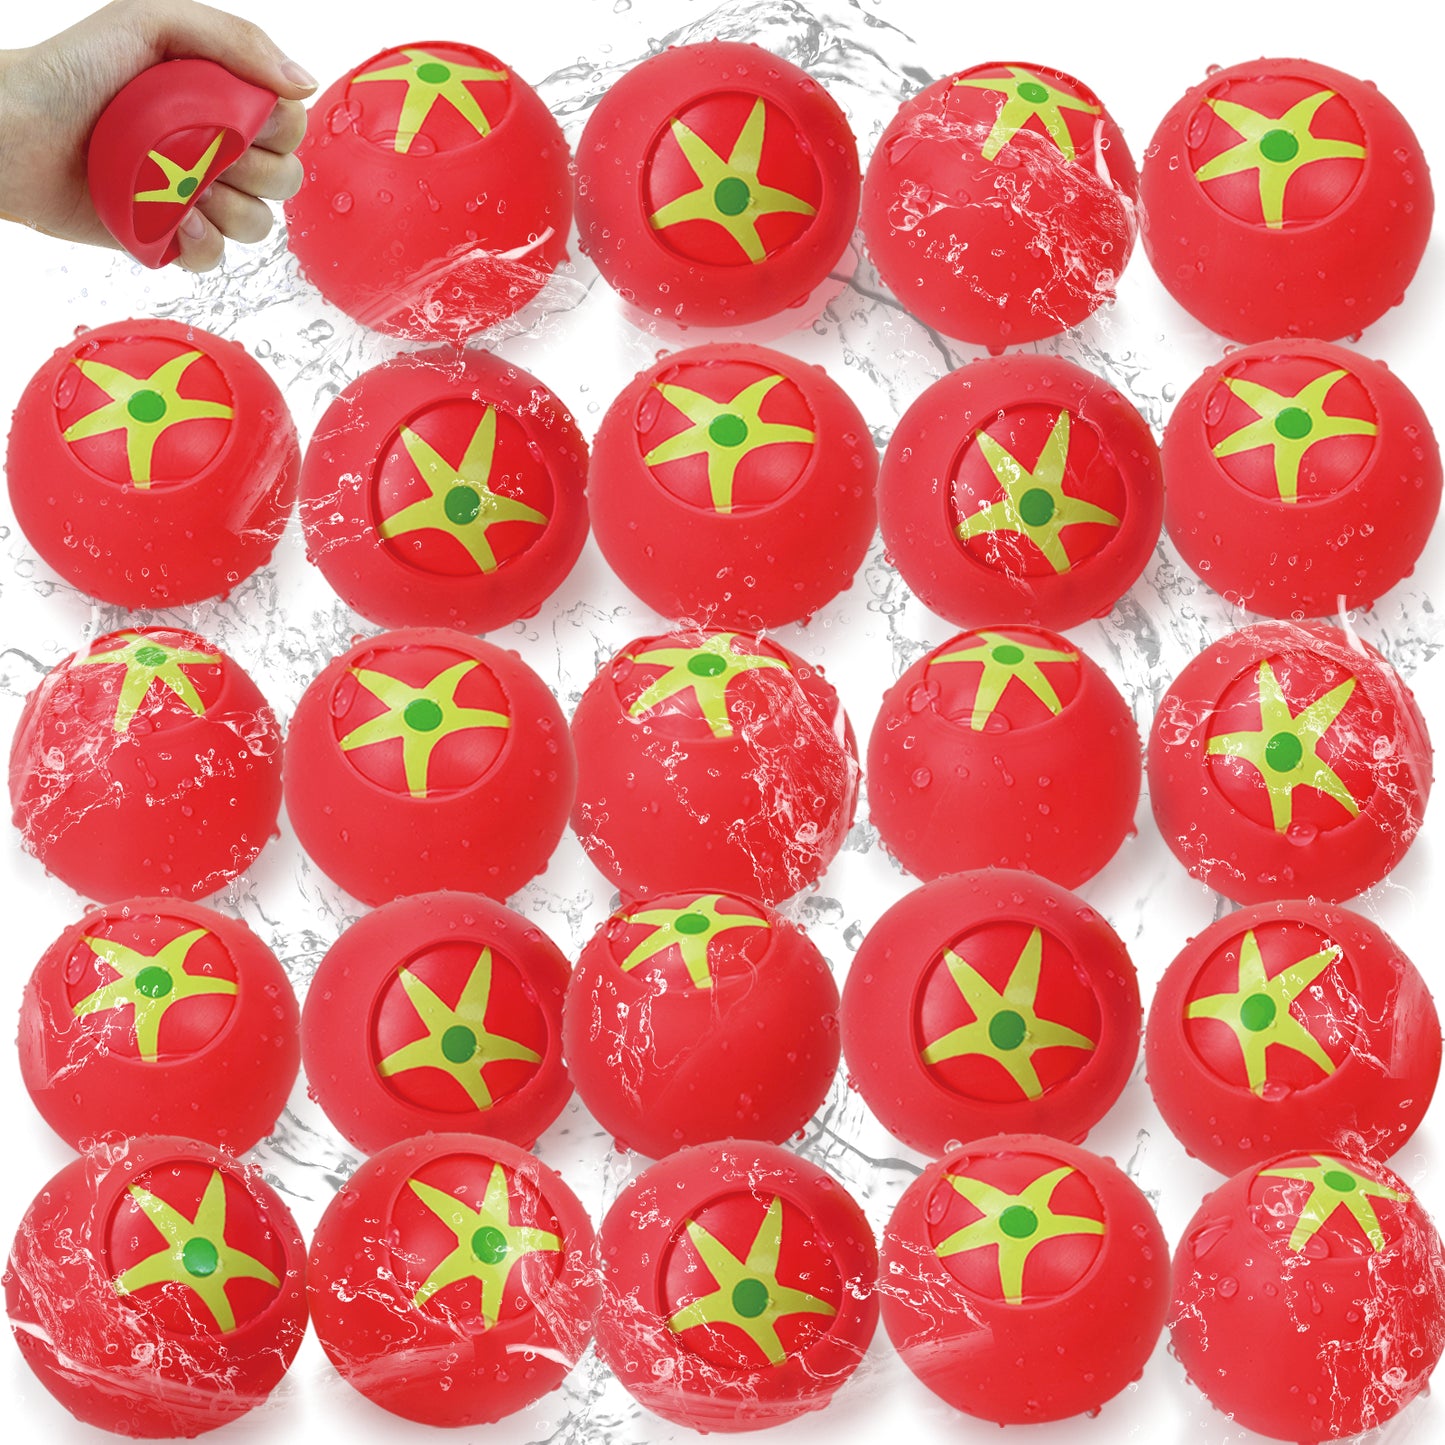 Reusable Water Balls, Reusable Water Balloons for Outdoor Toys and Games, Water Toys for Kids and Adults Boys and Girls - Summer Toys Ball for Pool and Backyard Fun